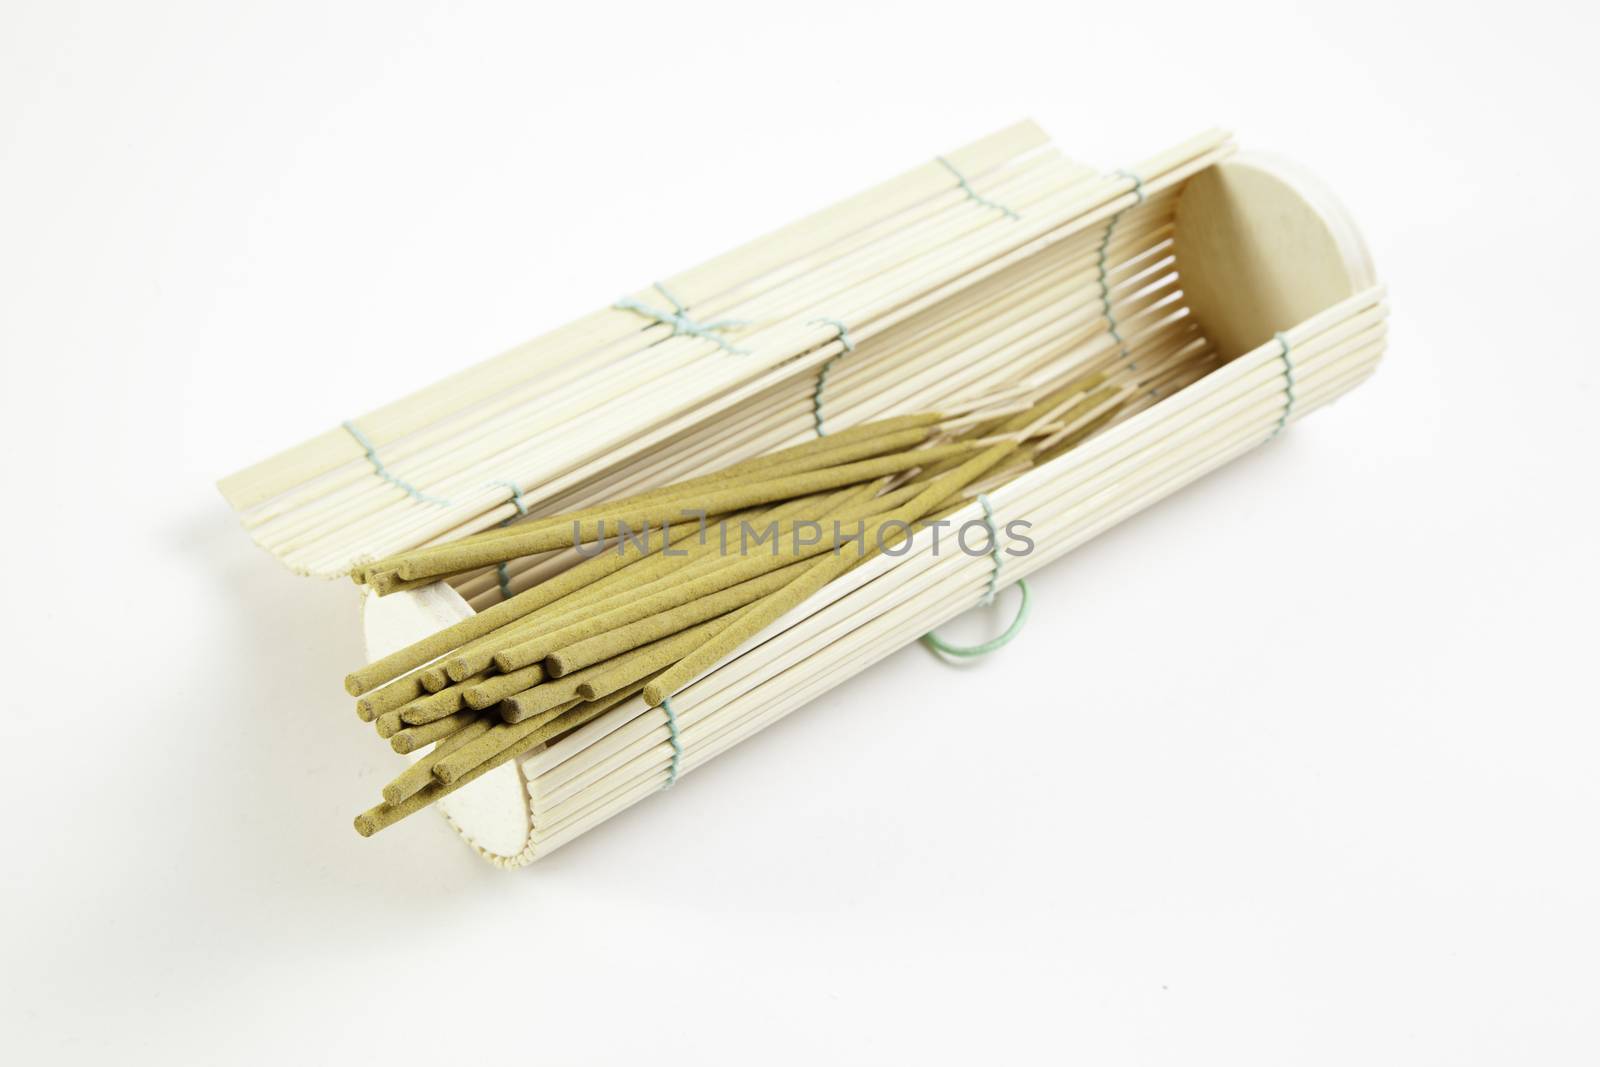 Incense and bamboo, detail of an object aromatherapy, spa tool, relaxation